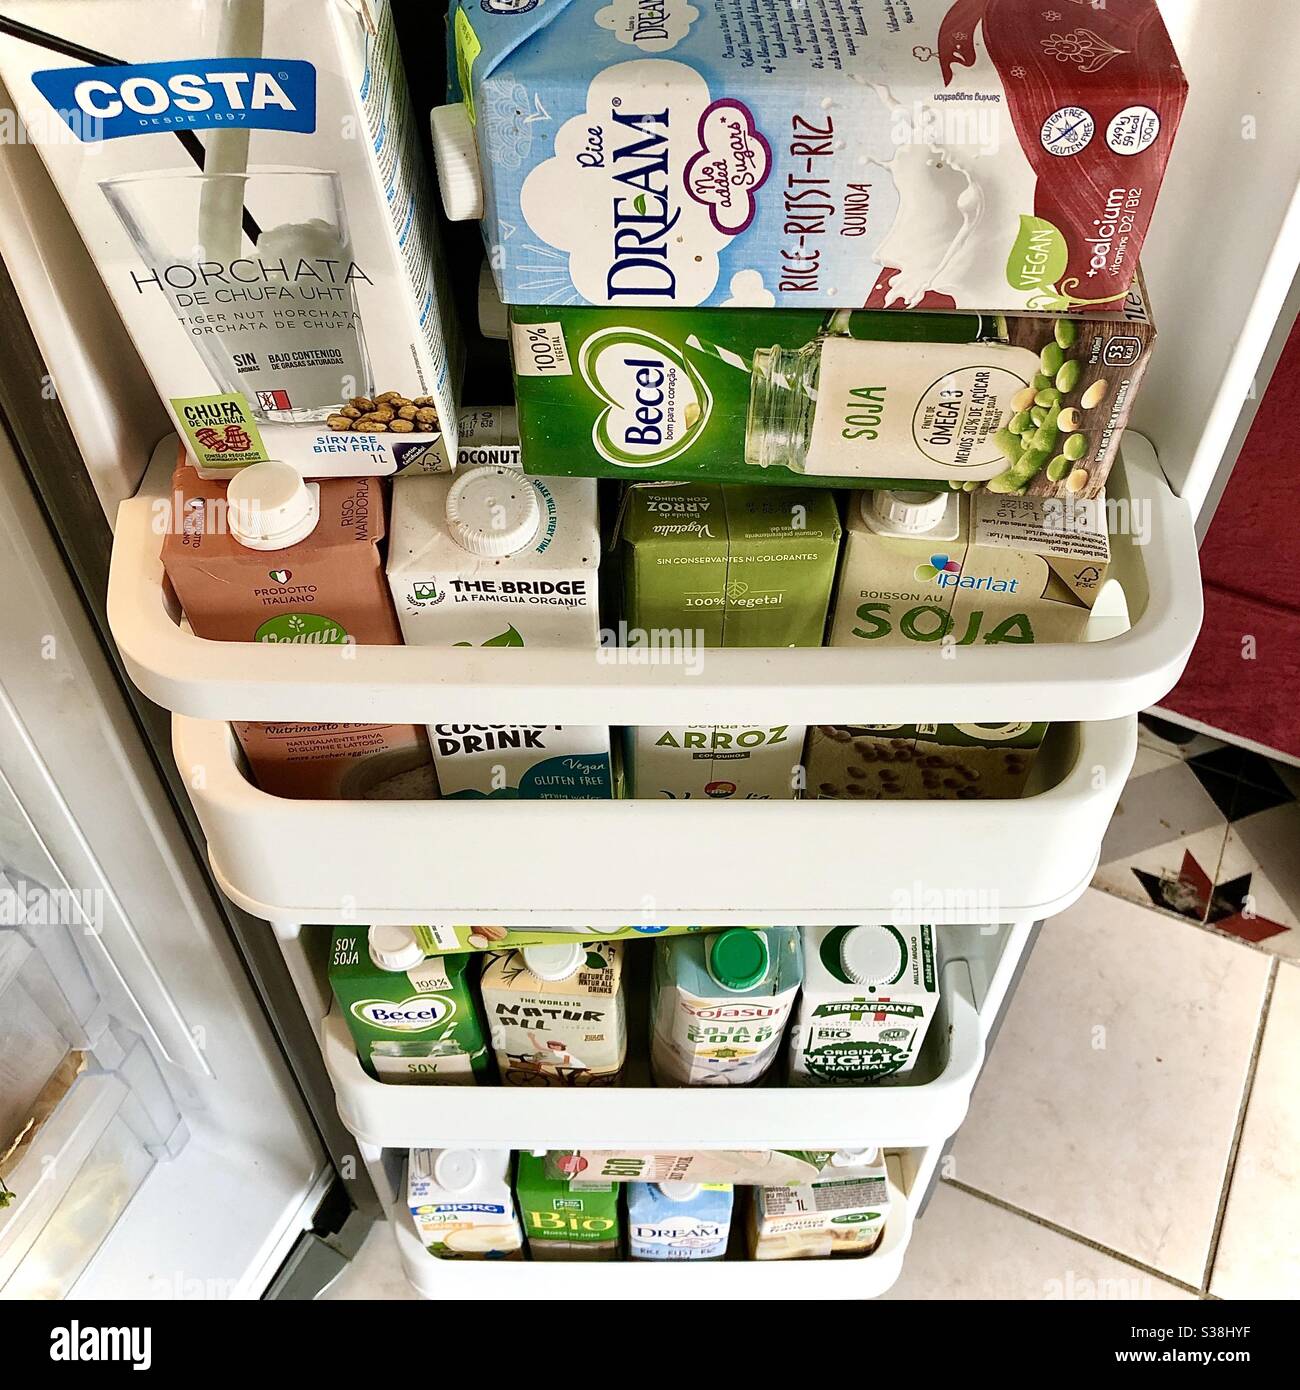 Refrigerator door filled with cartons of healthy plant-based alternative milks in preparation for Covid virus lockdown and shops running out of supplies. Stock Photo